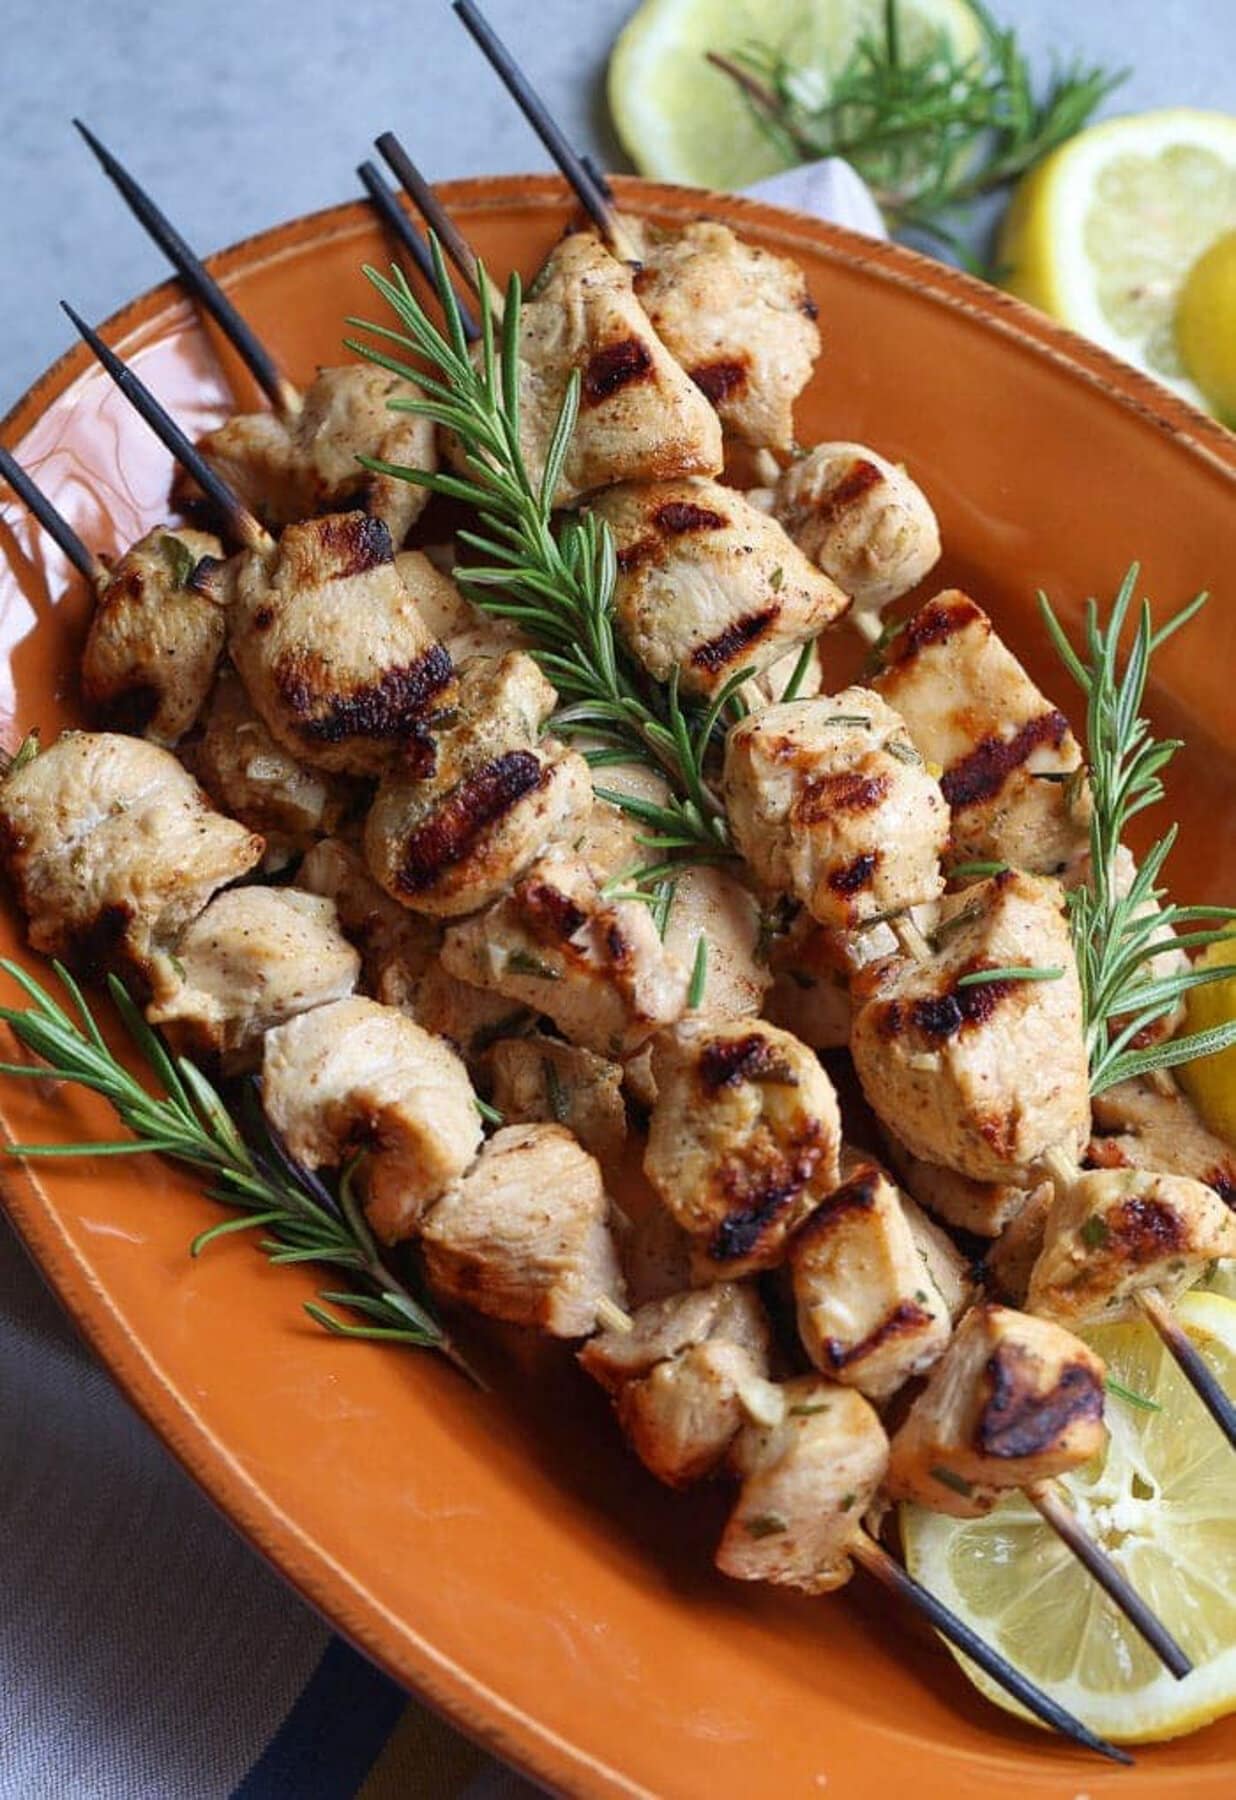 Chicken Kabobs made with rosemary grilled on skewers.